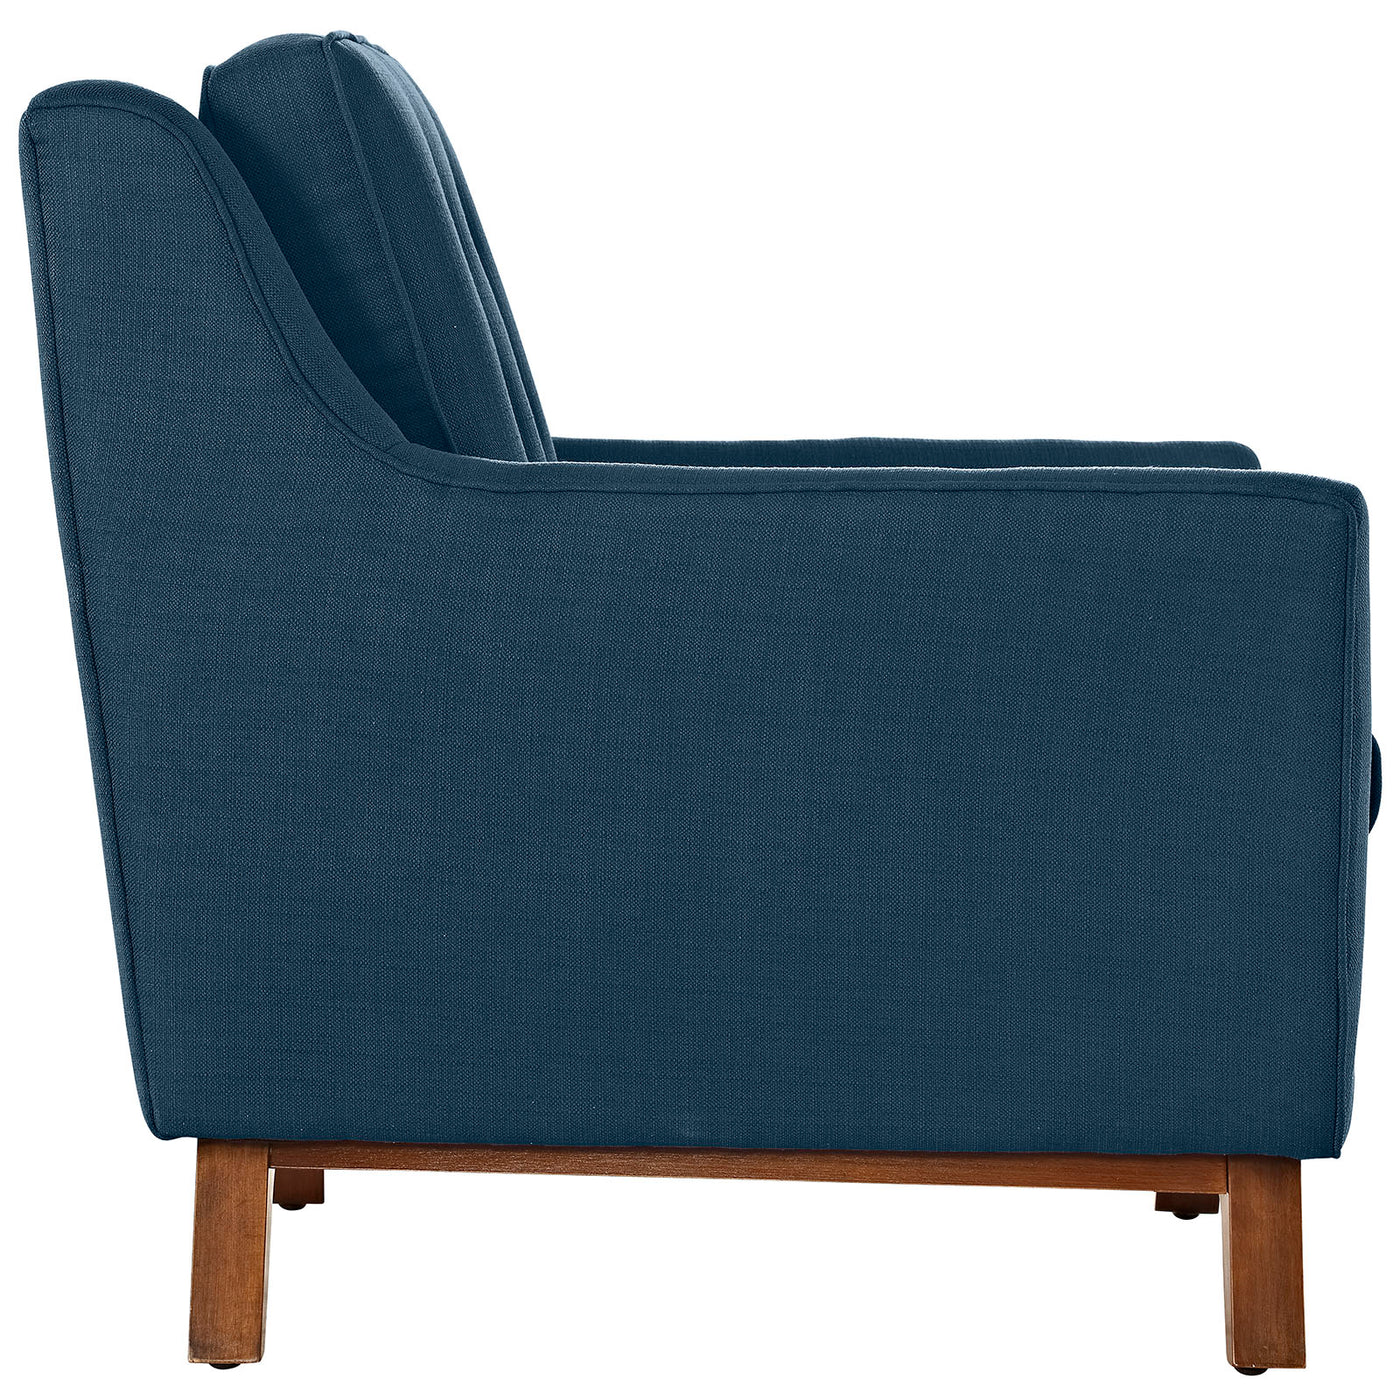 Beguile Upholstered Fabric Armchair